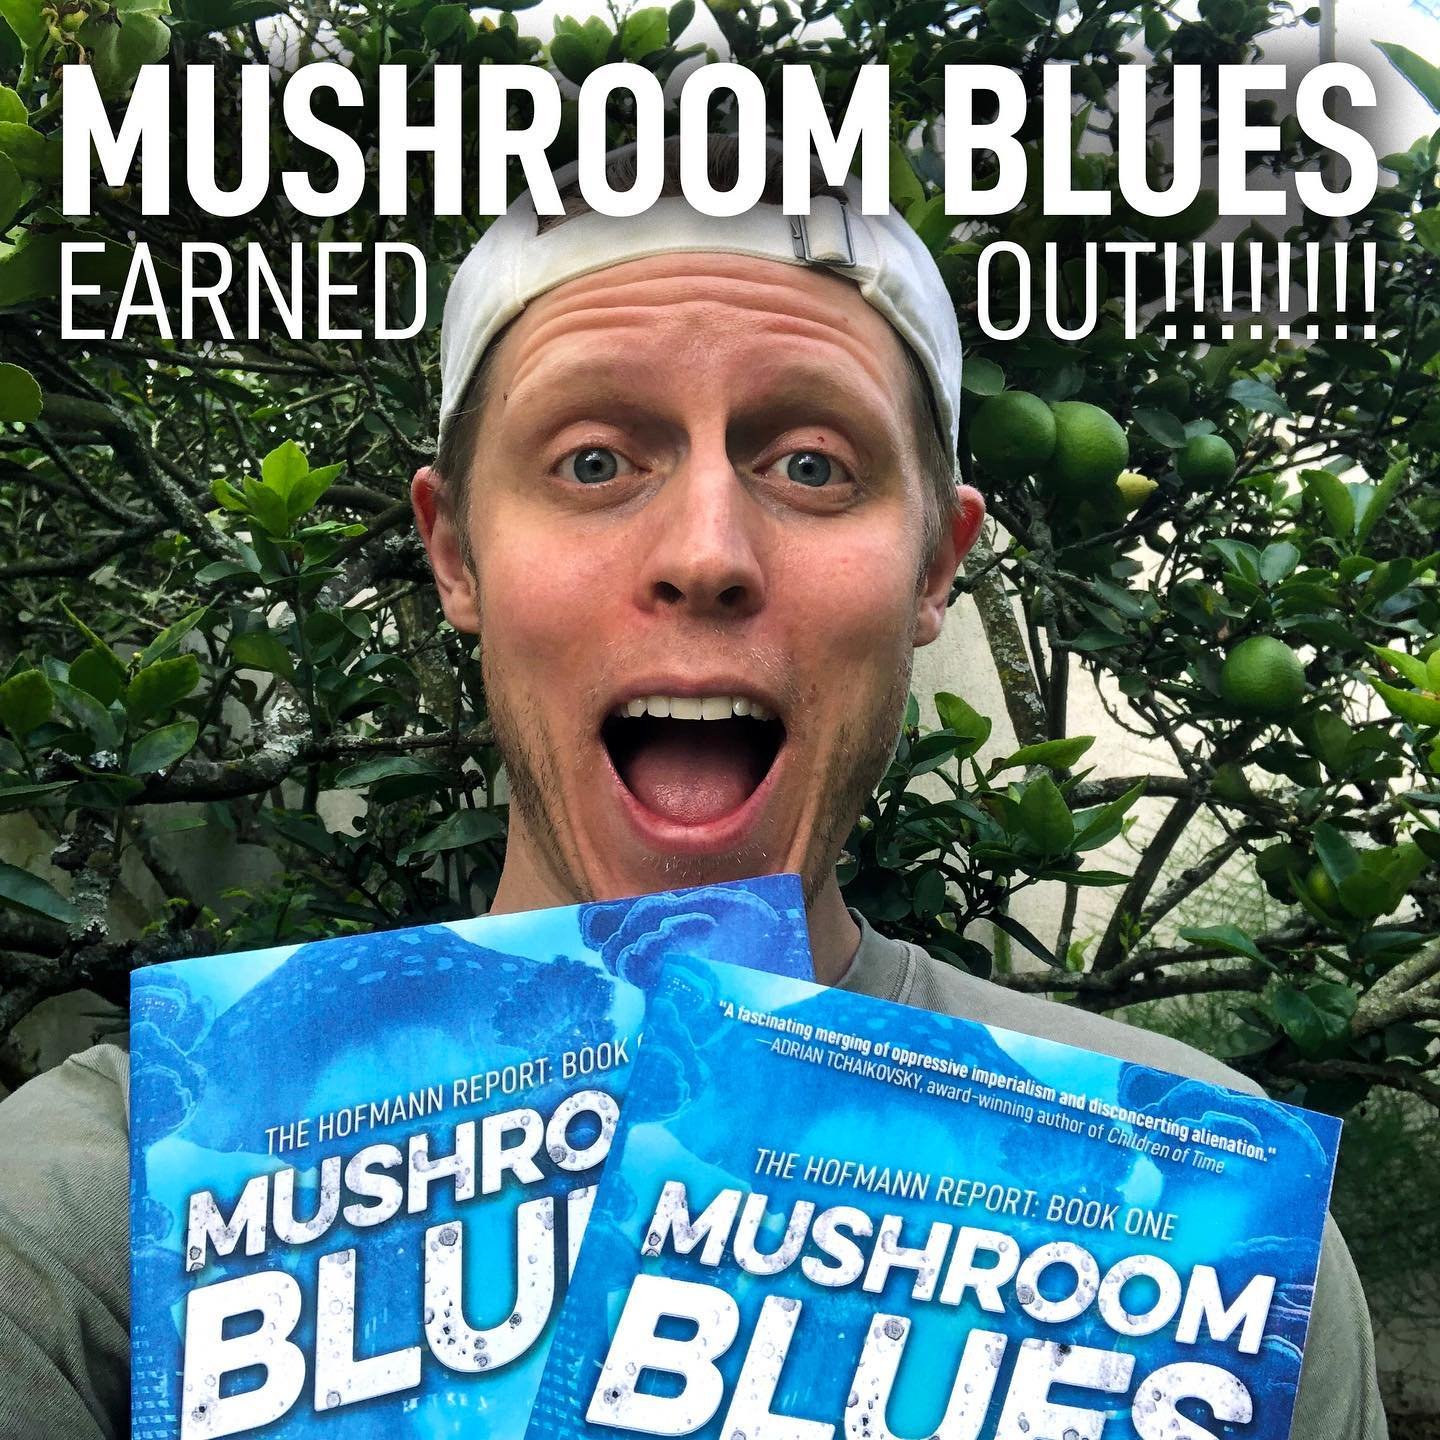 My debut novel #MushroomBlues EARNED OUT! I&rsquo;m so grateful that I was able to achieve my &ldquo;indie earn out&rdquo; (as @mjkuhnbooks calls it) so soon after release. I was also lucky to forego a lot of costs&mdash;cover/interior design, format